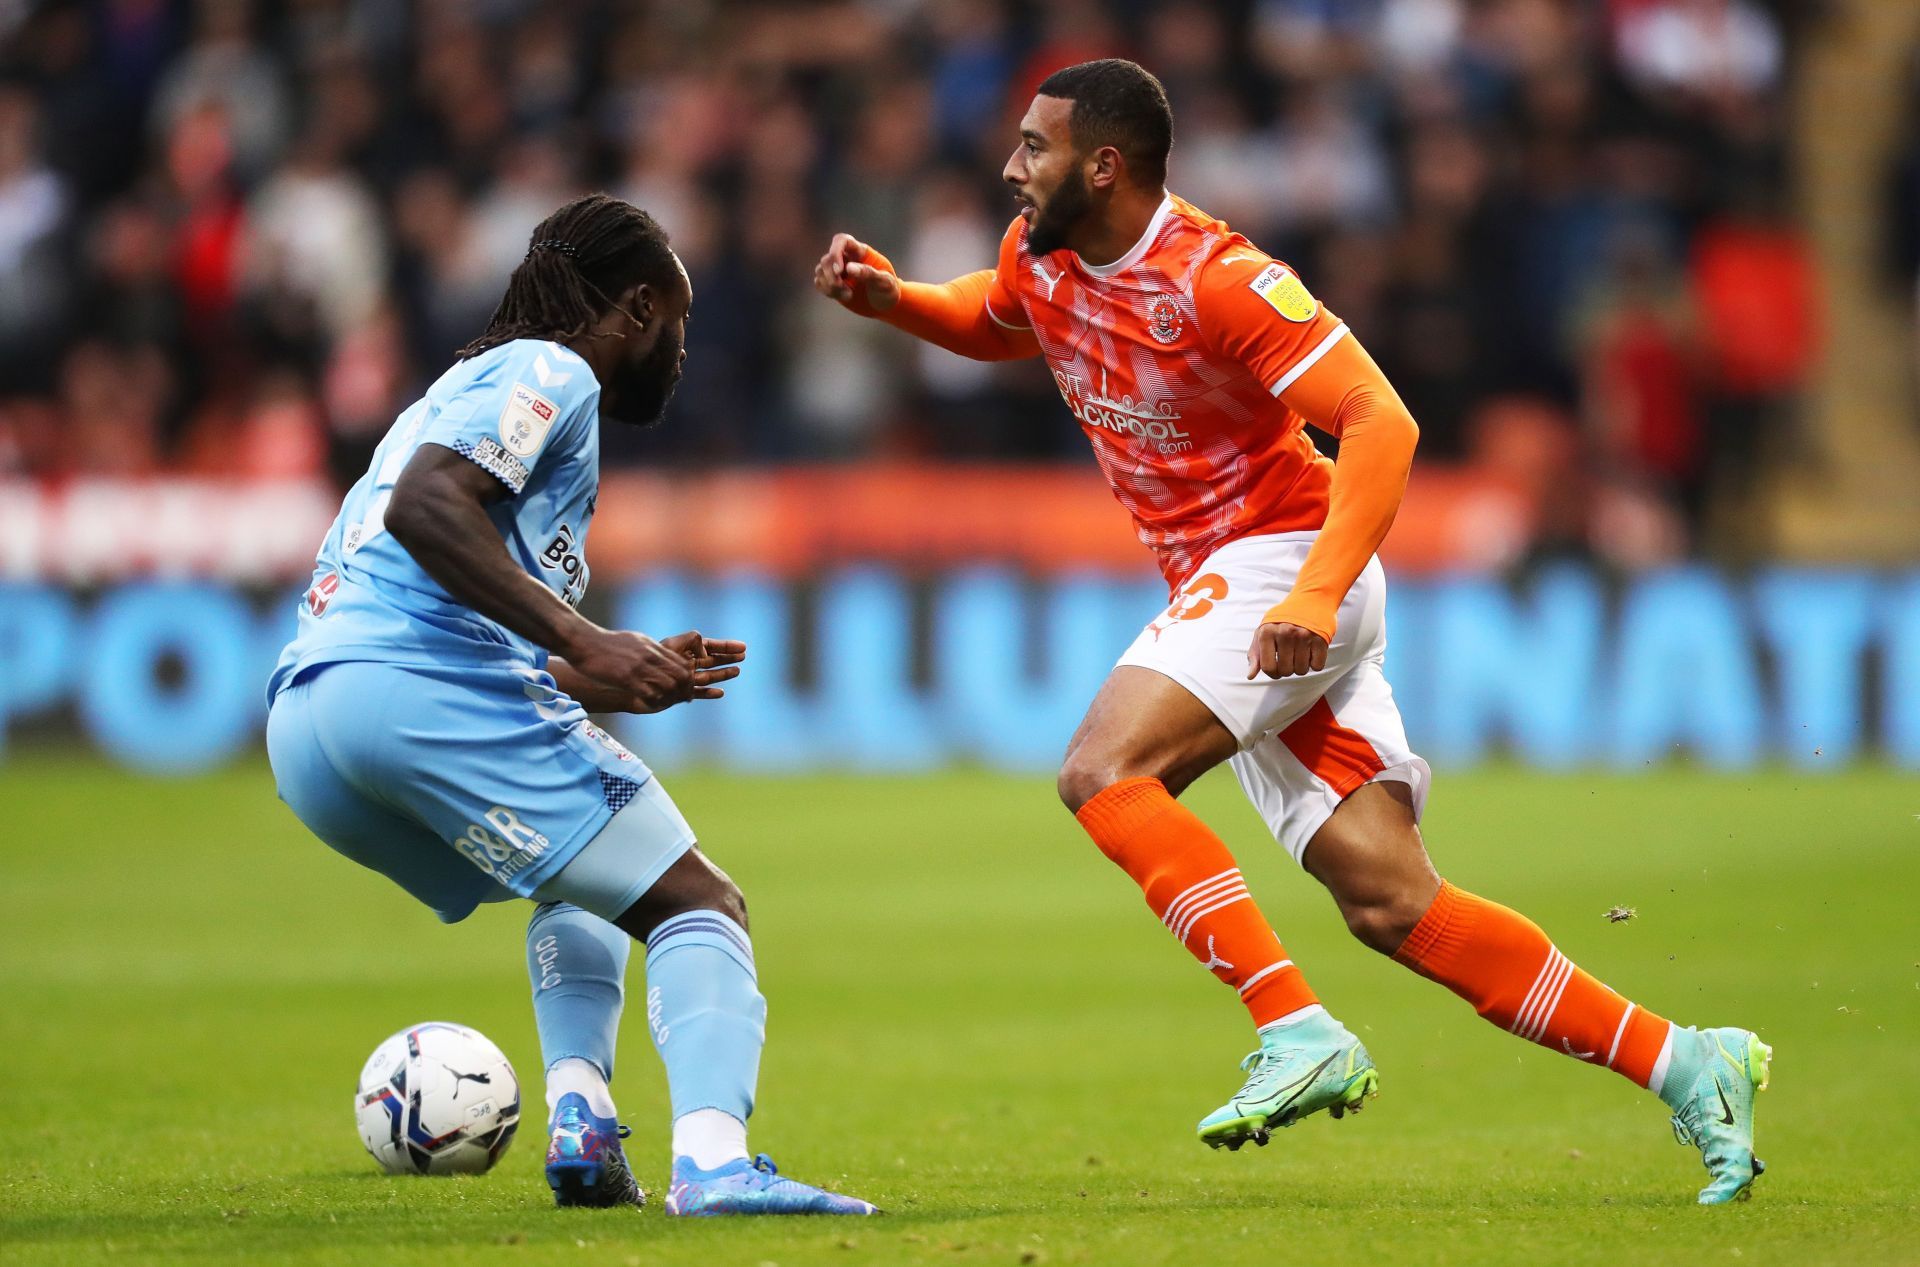 Blackpool face Coventry City on Tuesday